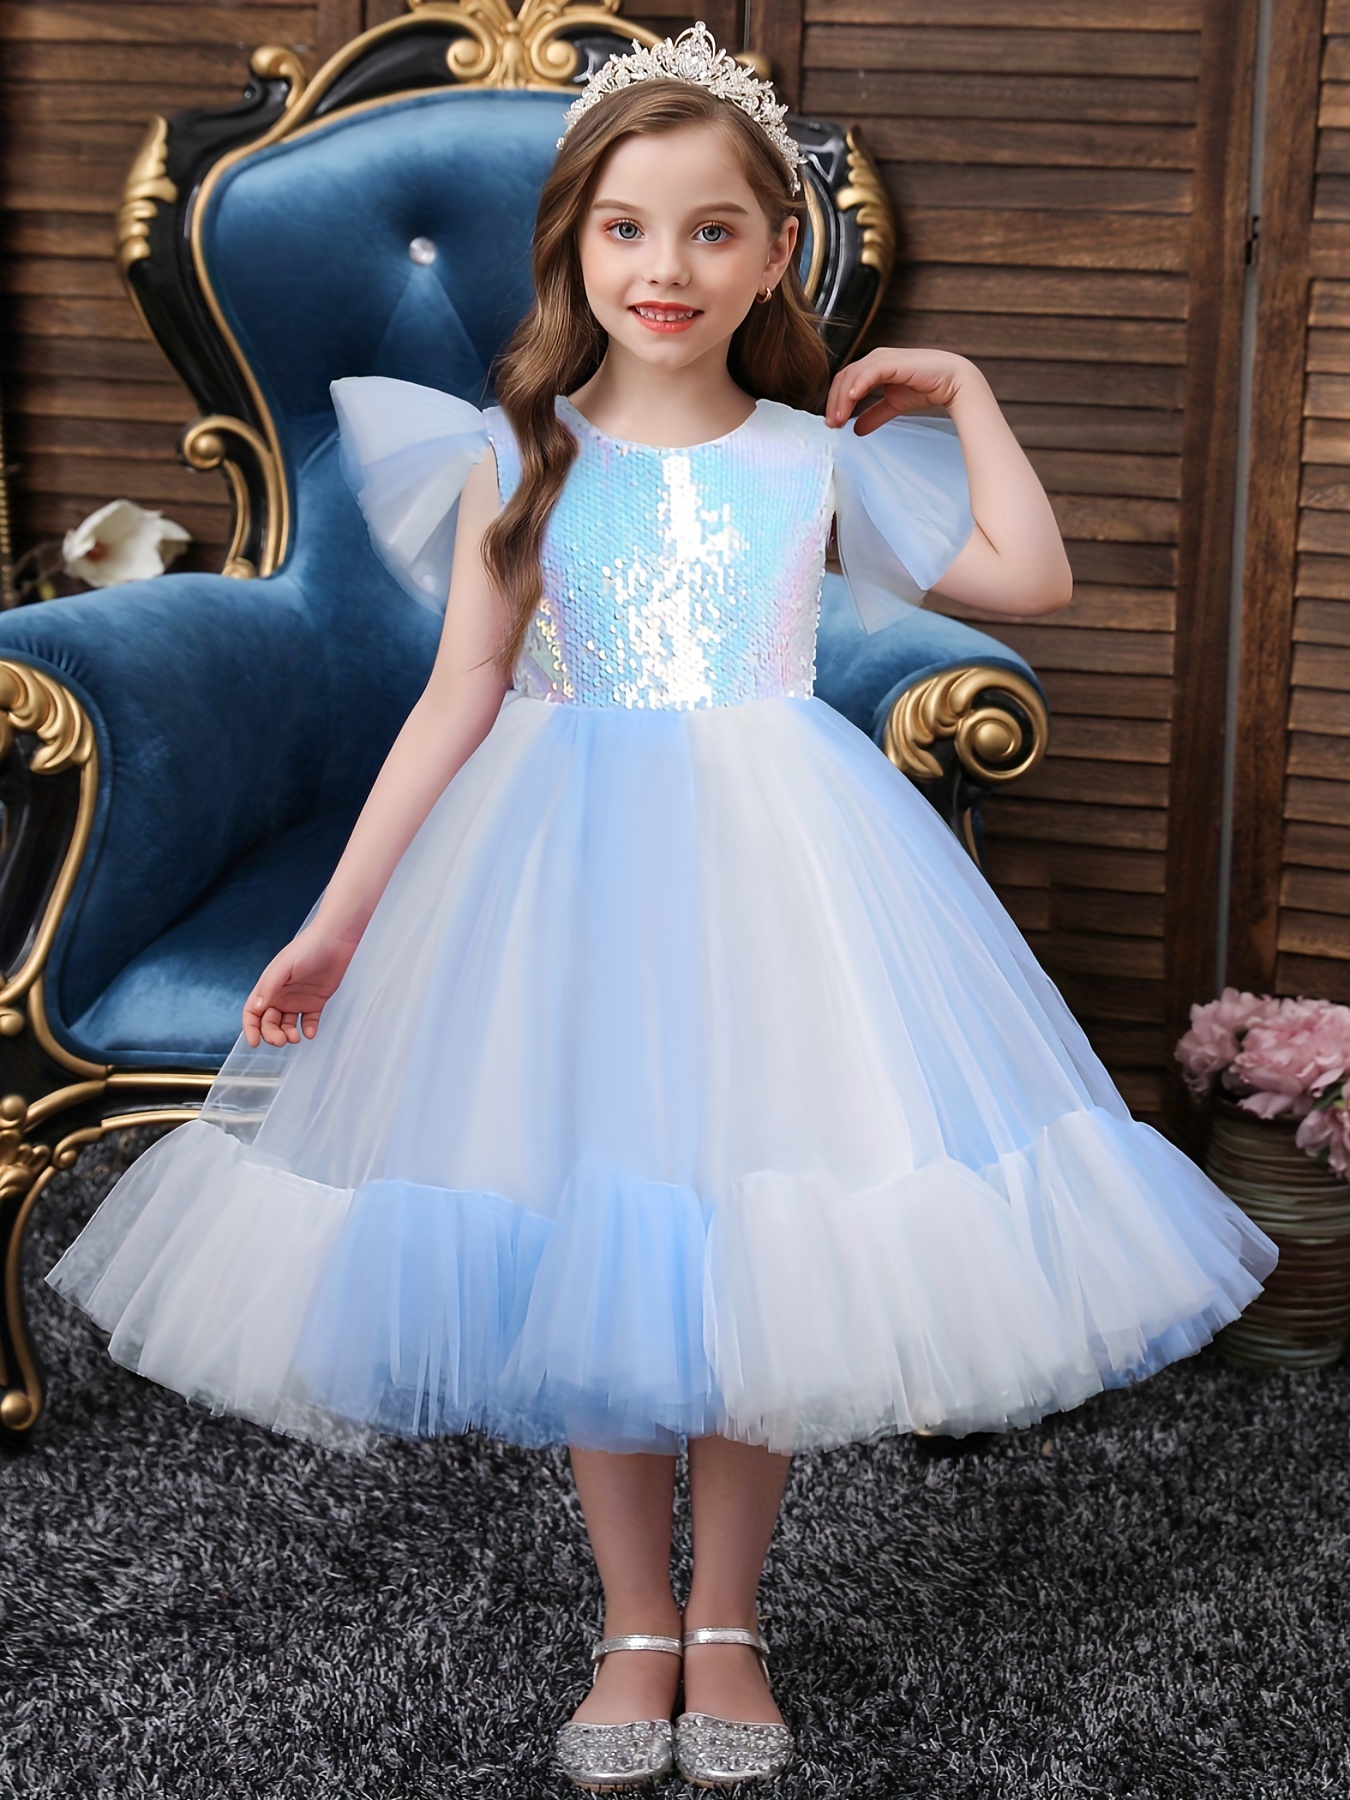 New Cute White Princess Wedding Girls Dress Tulle Bridesmaid Party